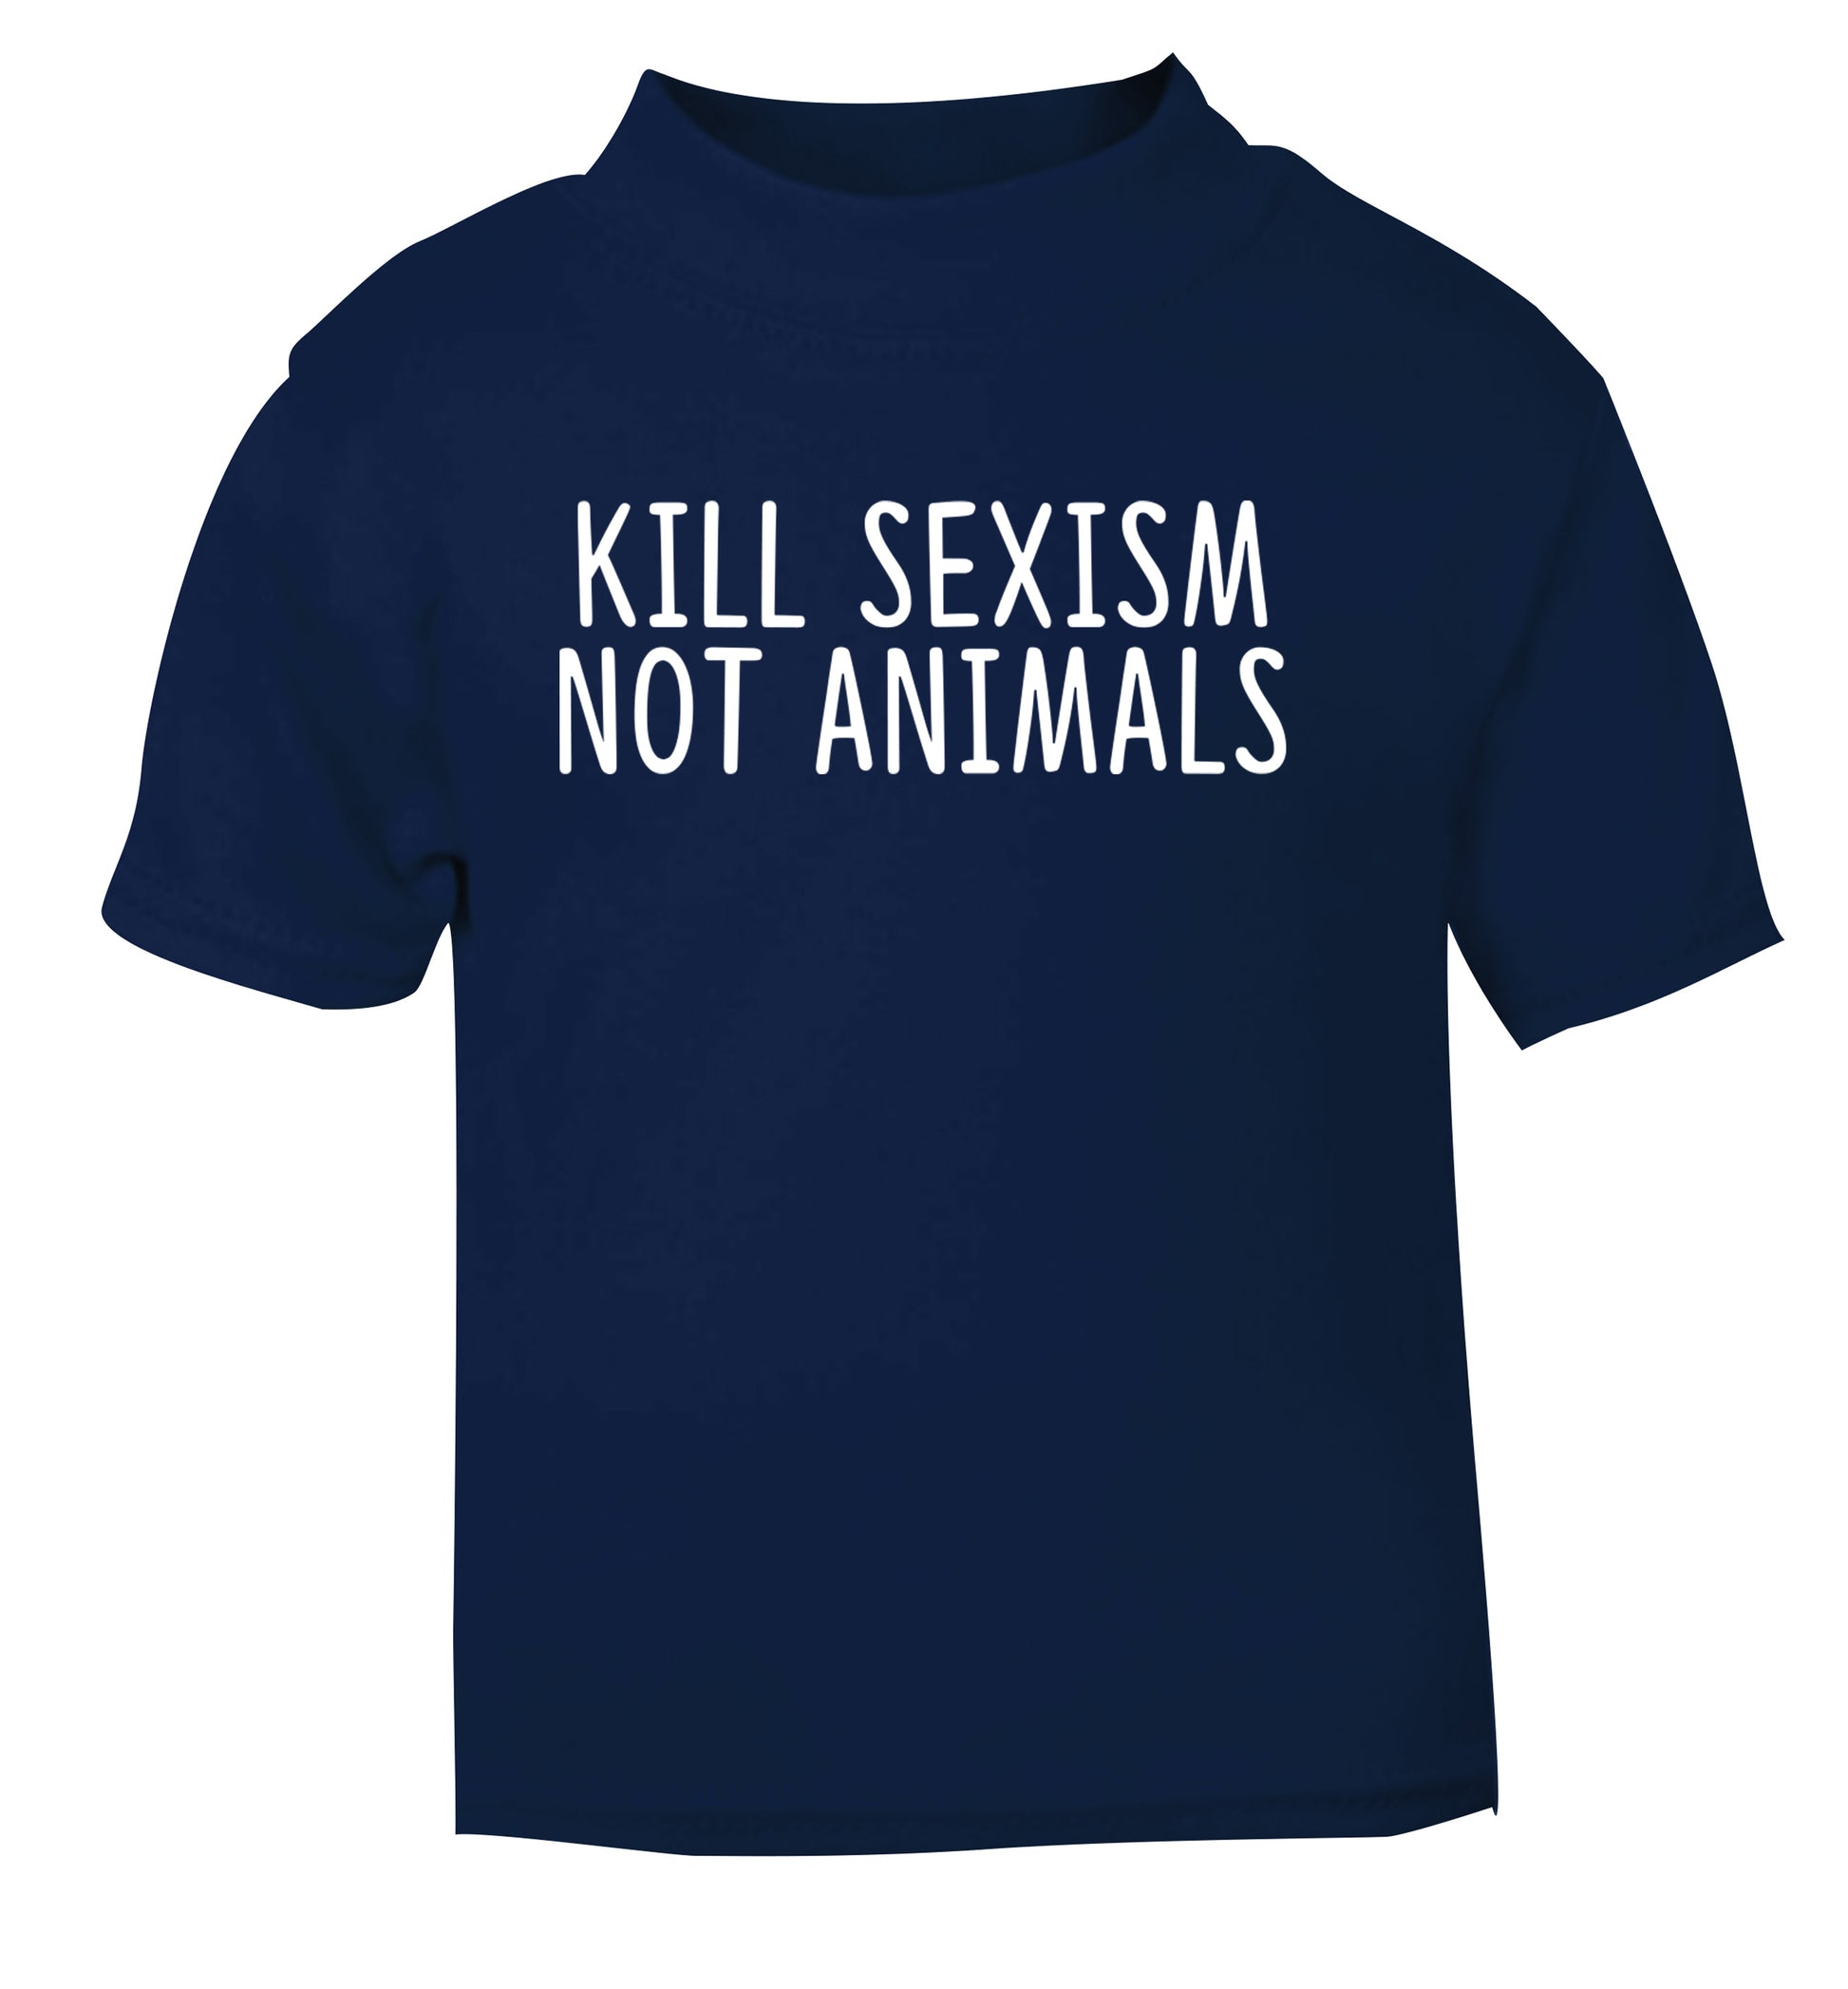 Kill Sexism Not Animals navy Baby Toddler Tshirt 2 Years